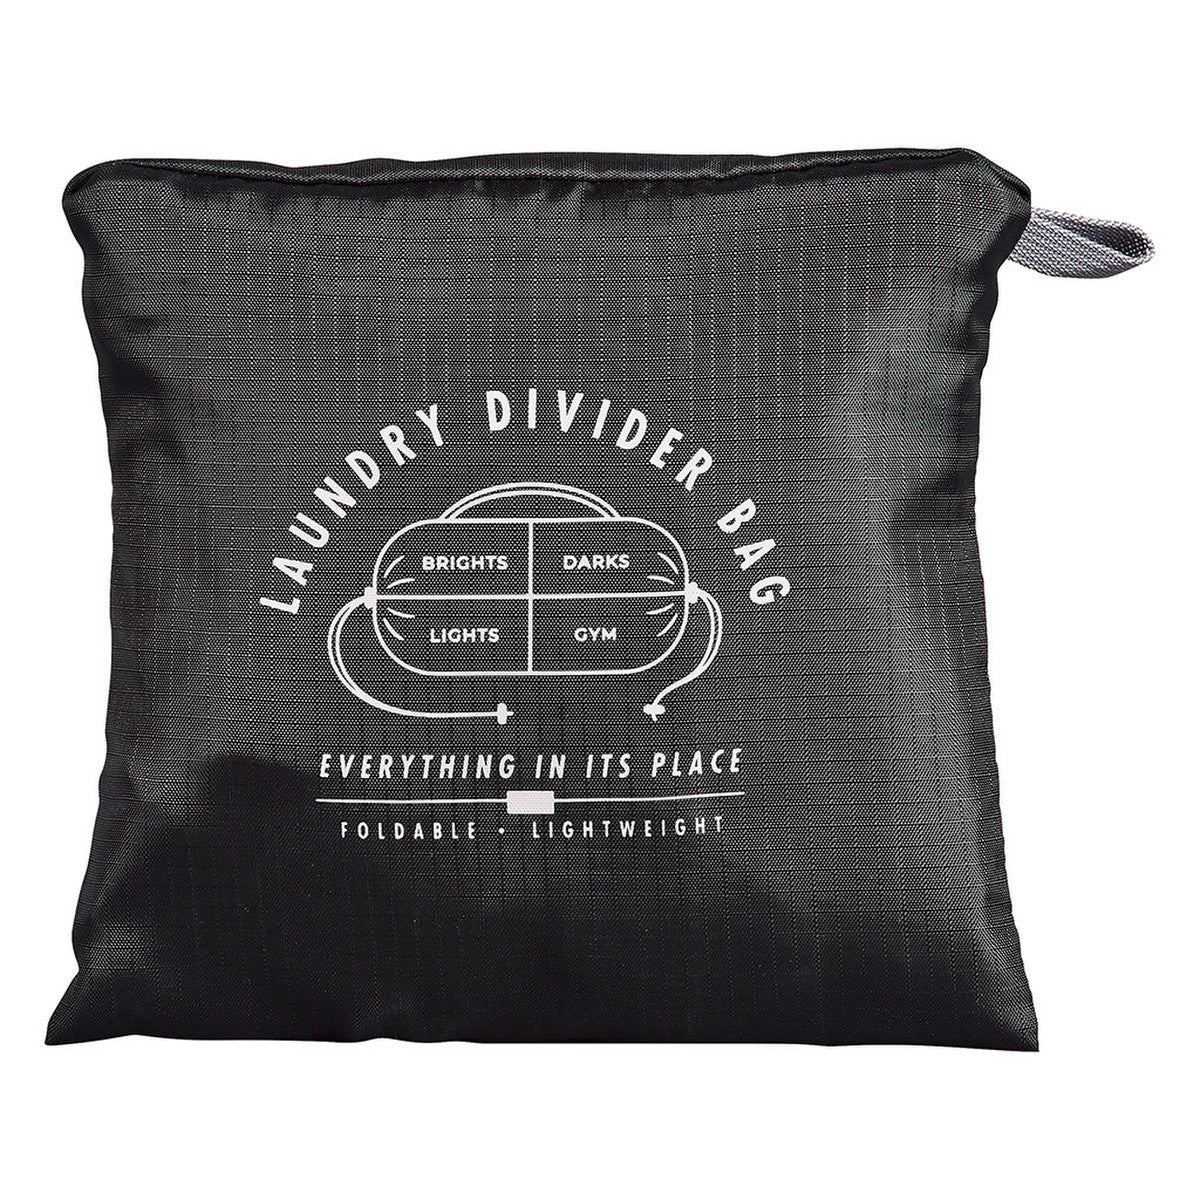 Laundry Divider Bag - Travel-Friendly and Streamlined